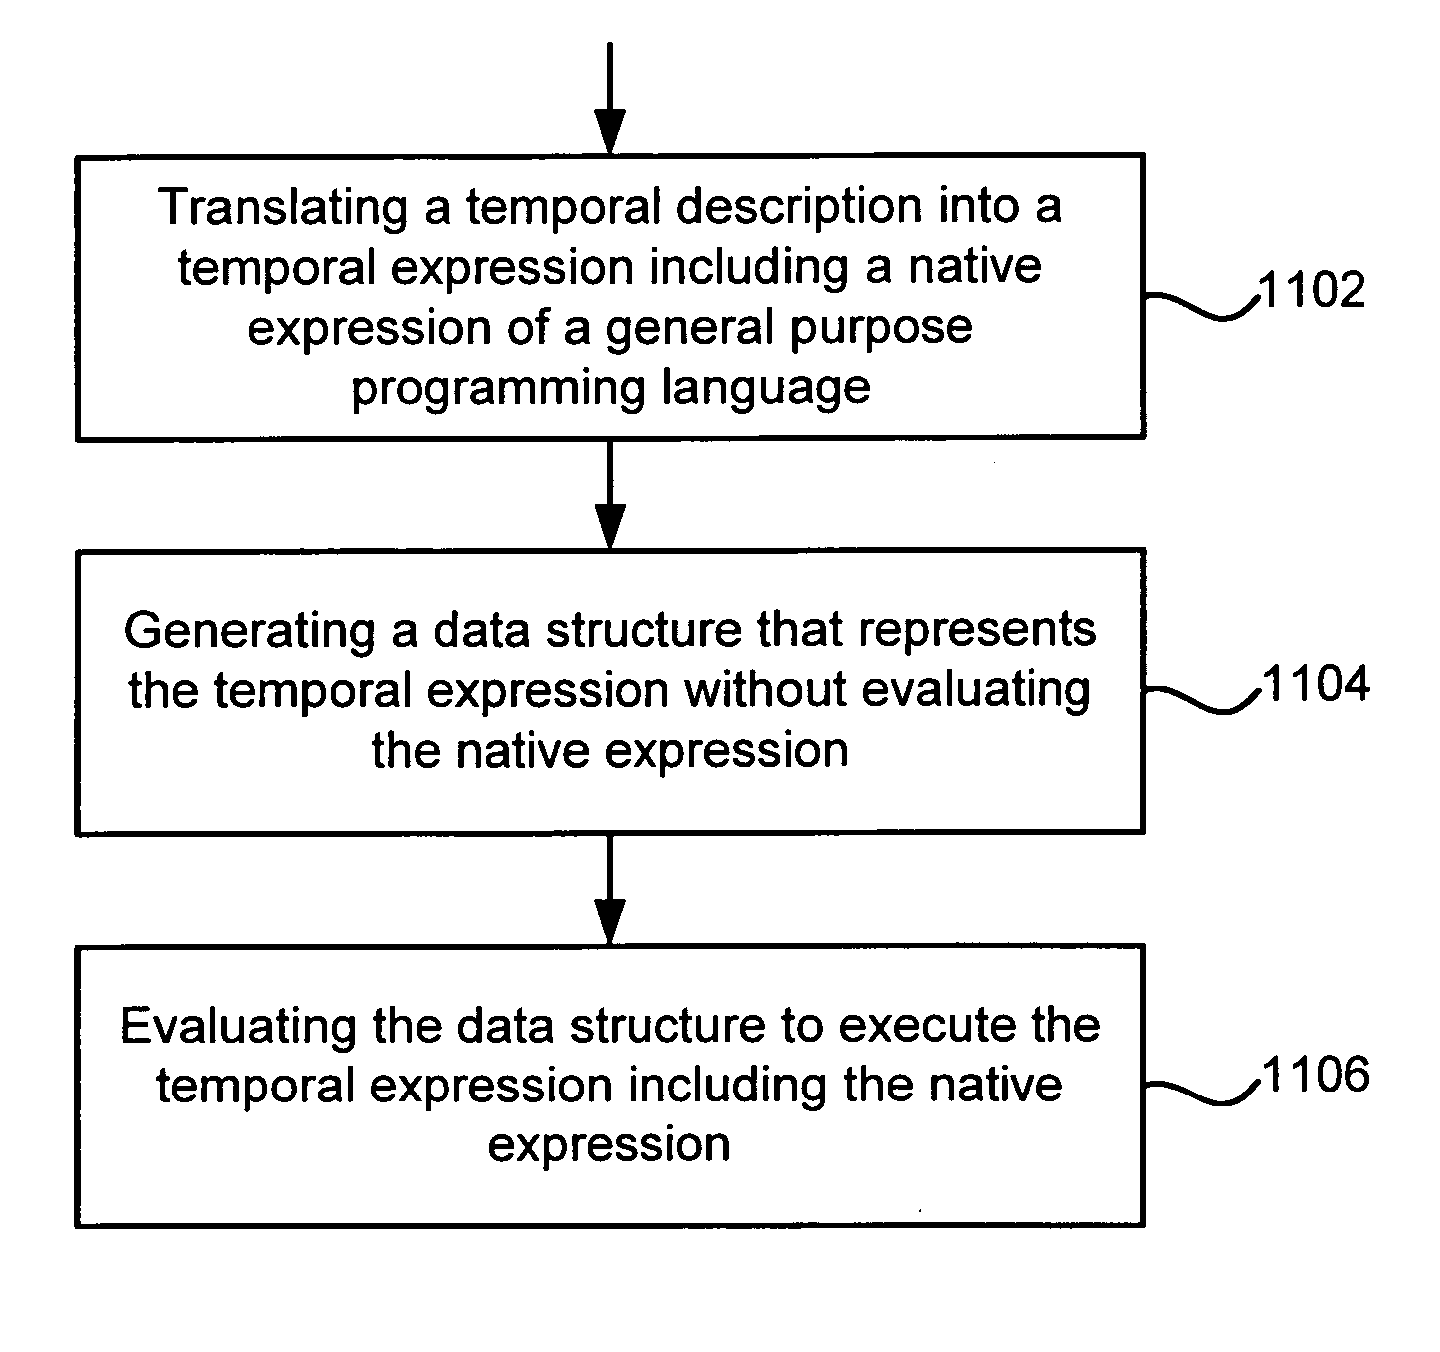 Evaluation and display of temporal descriptions